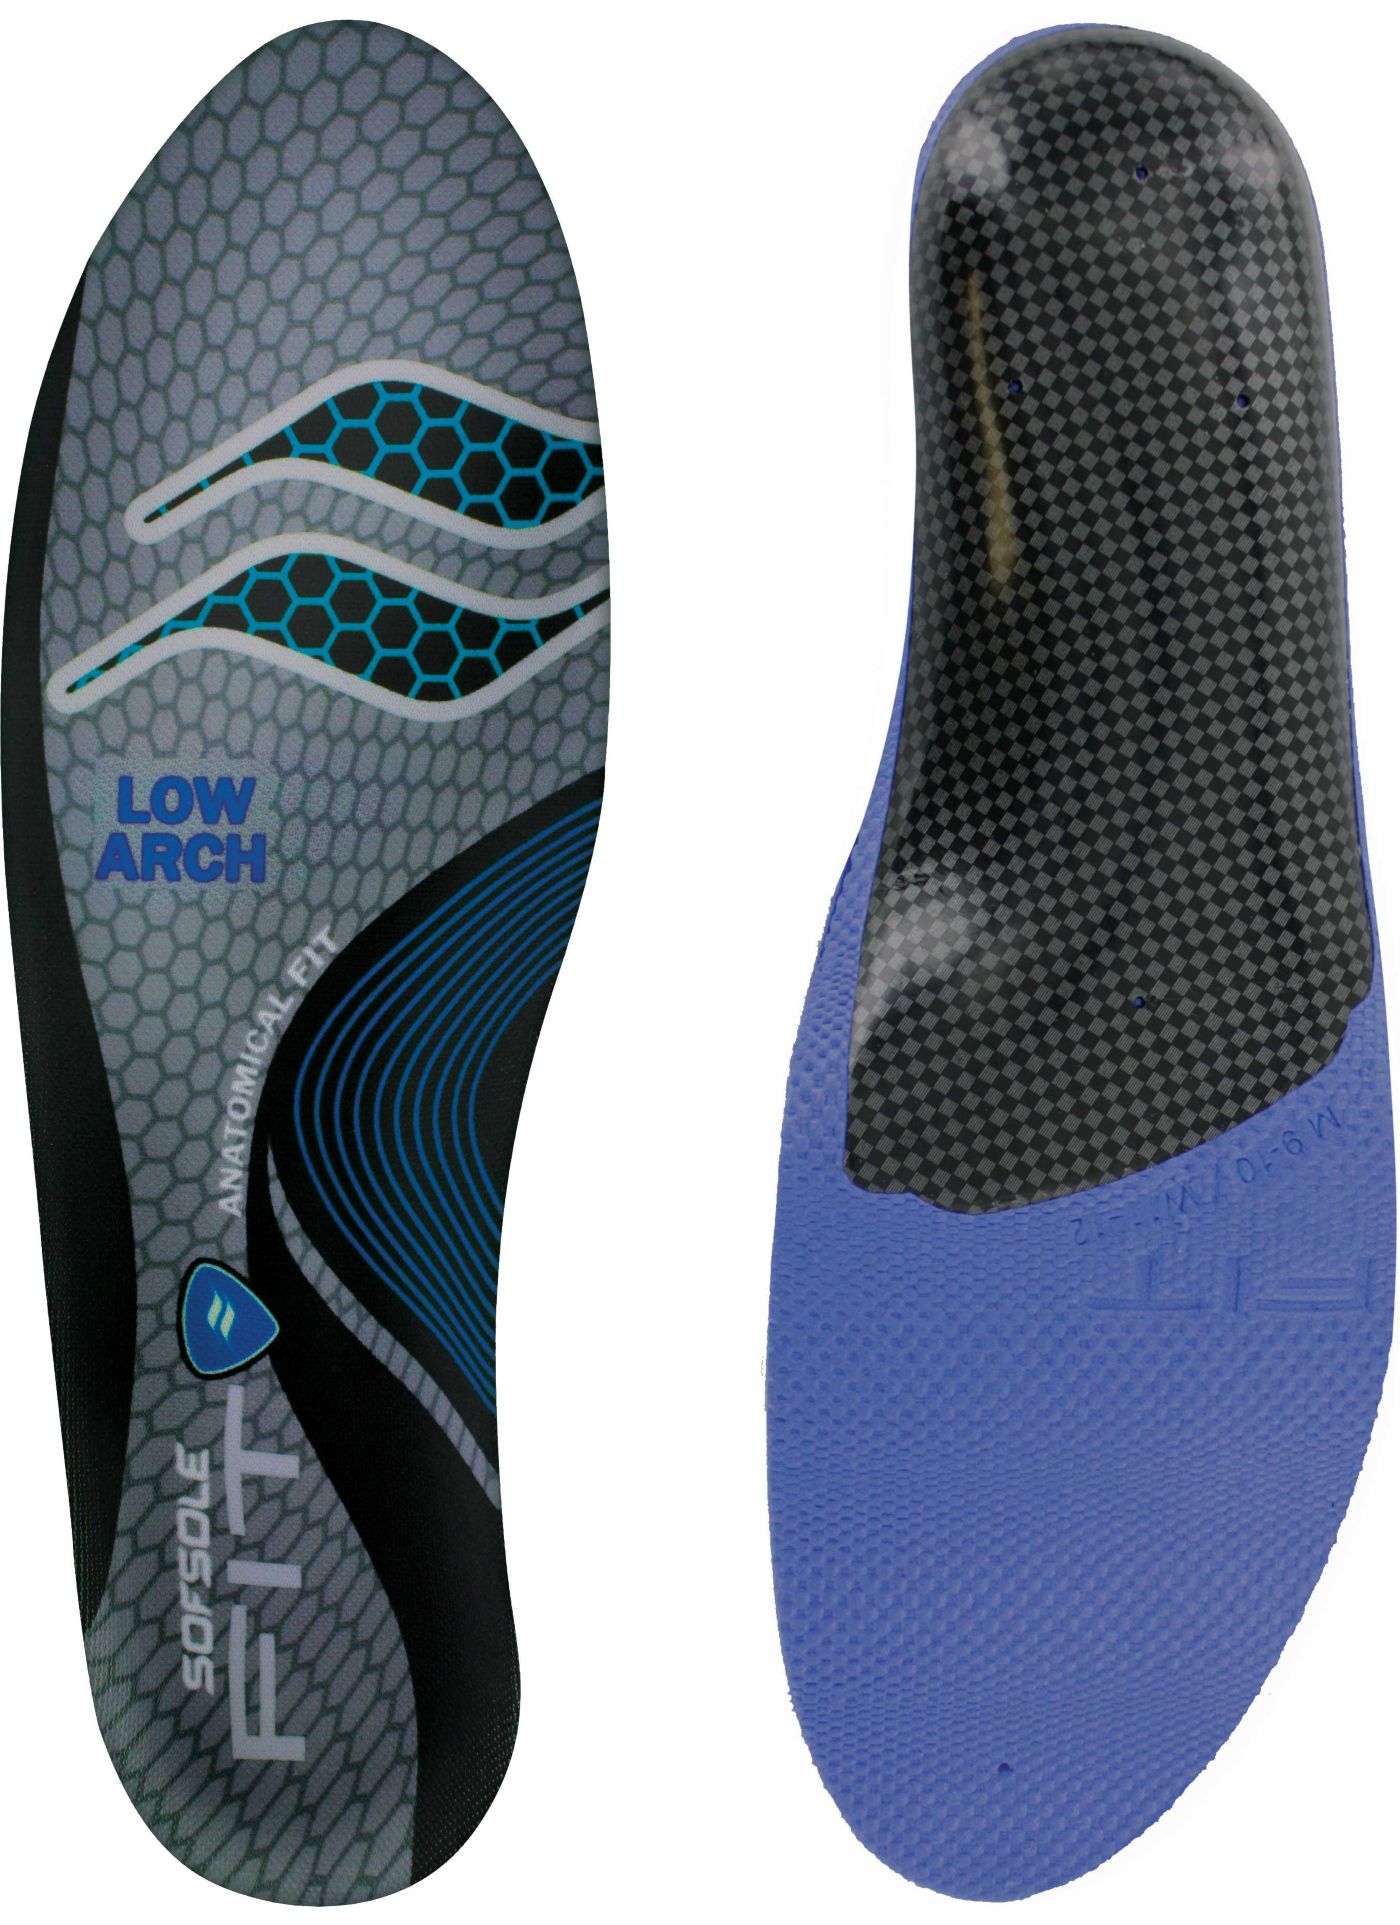 Sof Sole Fit Low Arch Insole DICK'S Sporting Goods